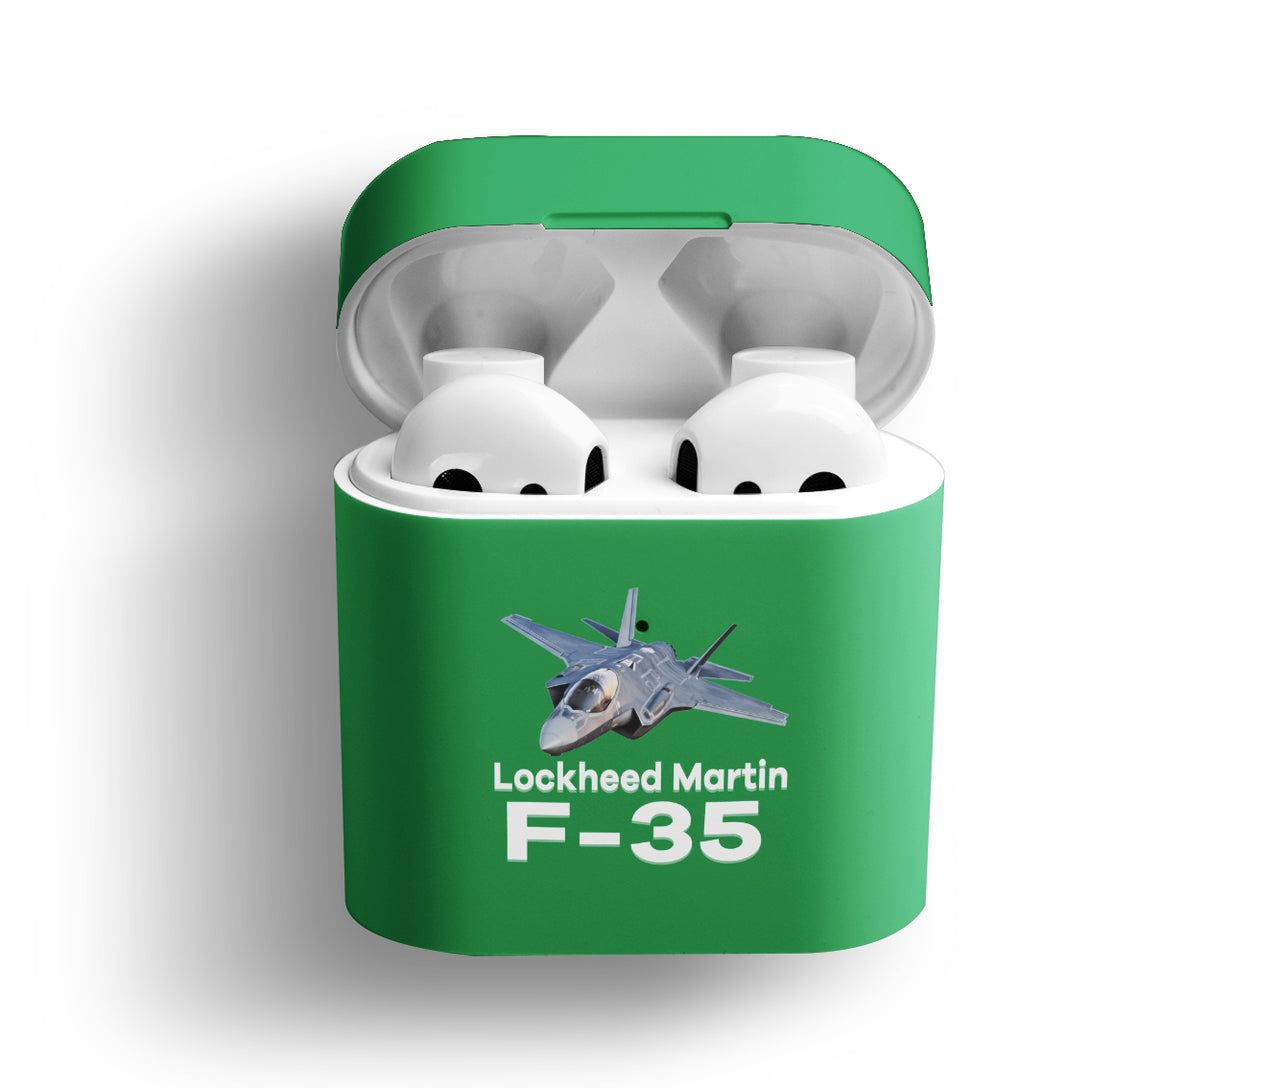 The Lockheed Martin F35 Designed AirPods  Cases